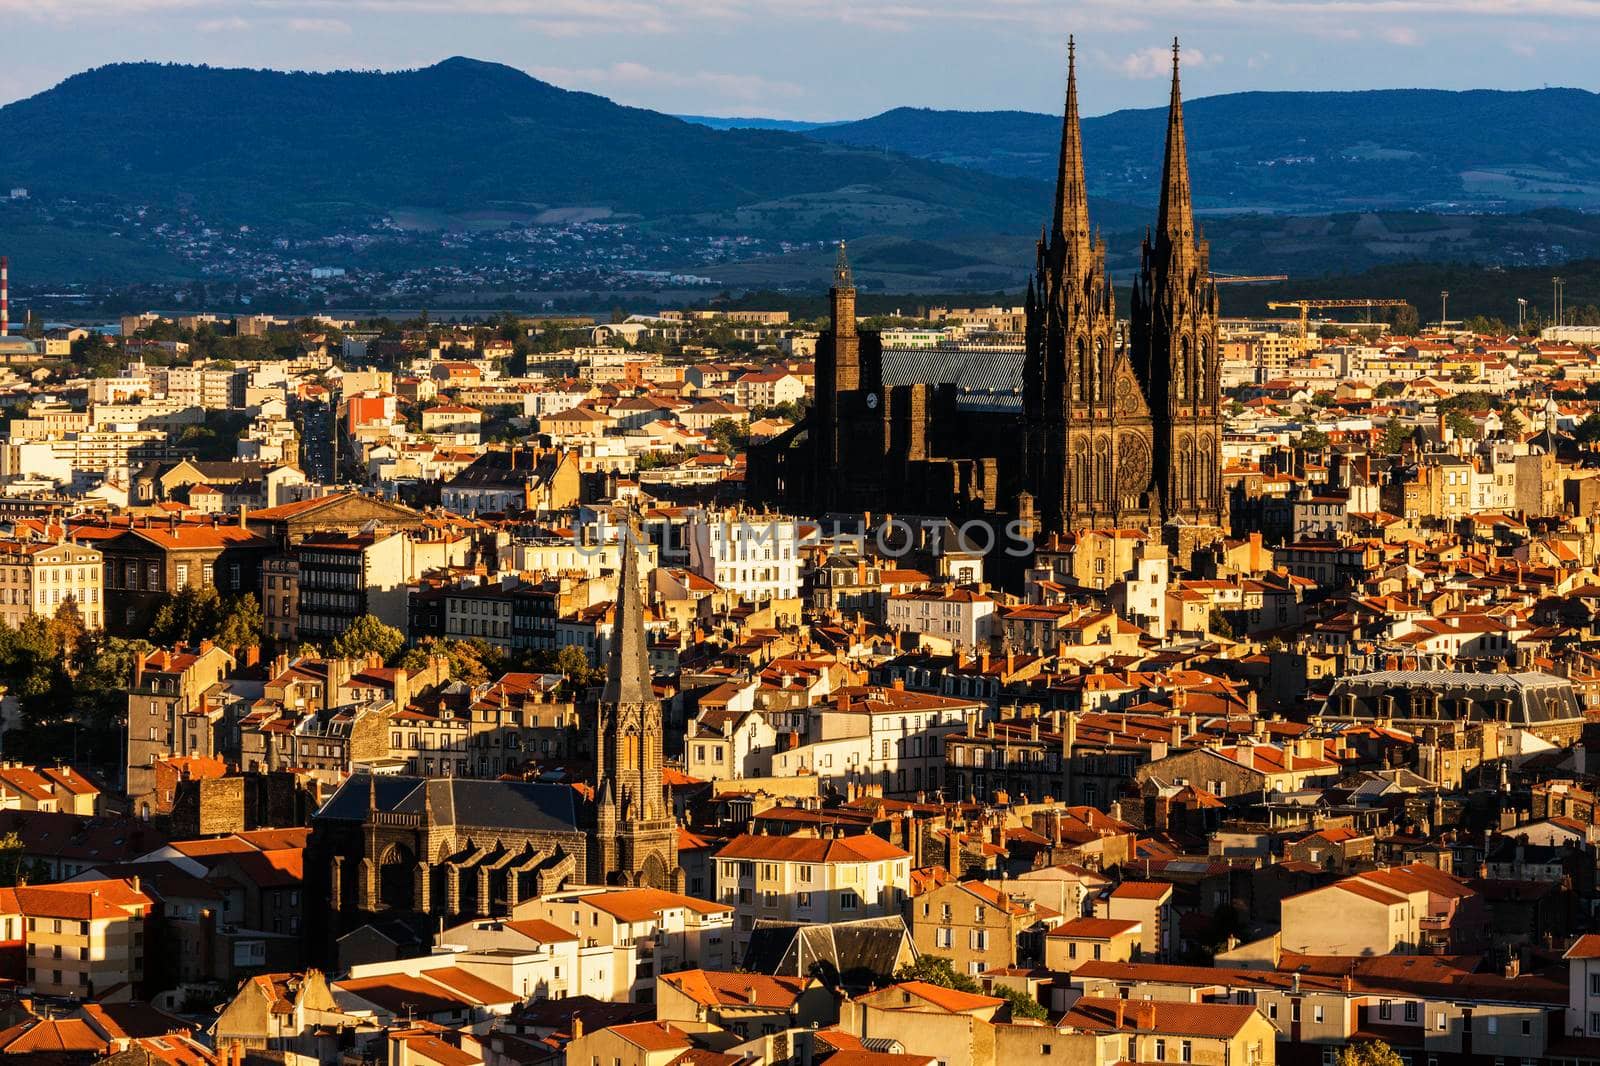 Clermont-Ferrand Cathedral. Clermont-Ferrand, Auvergne-Rhone-Alpes, France.